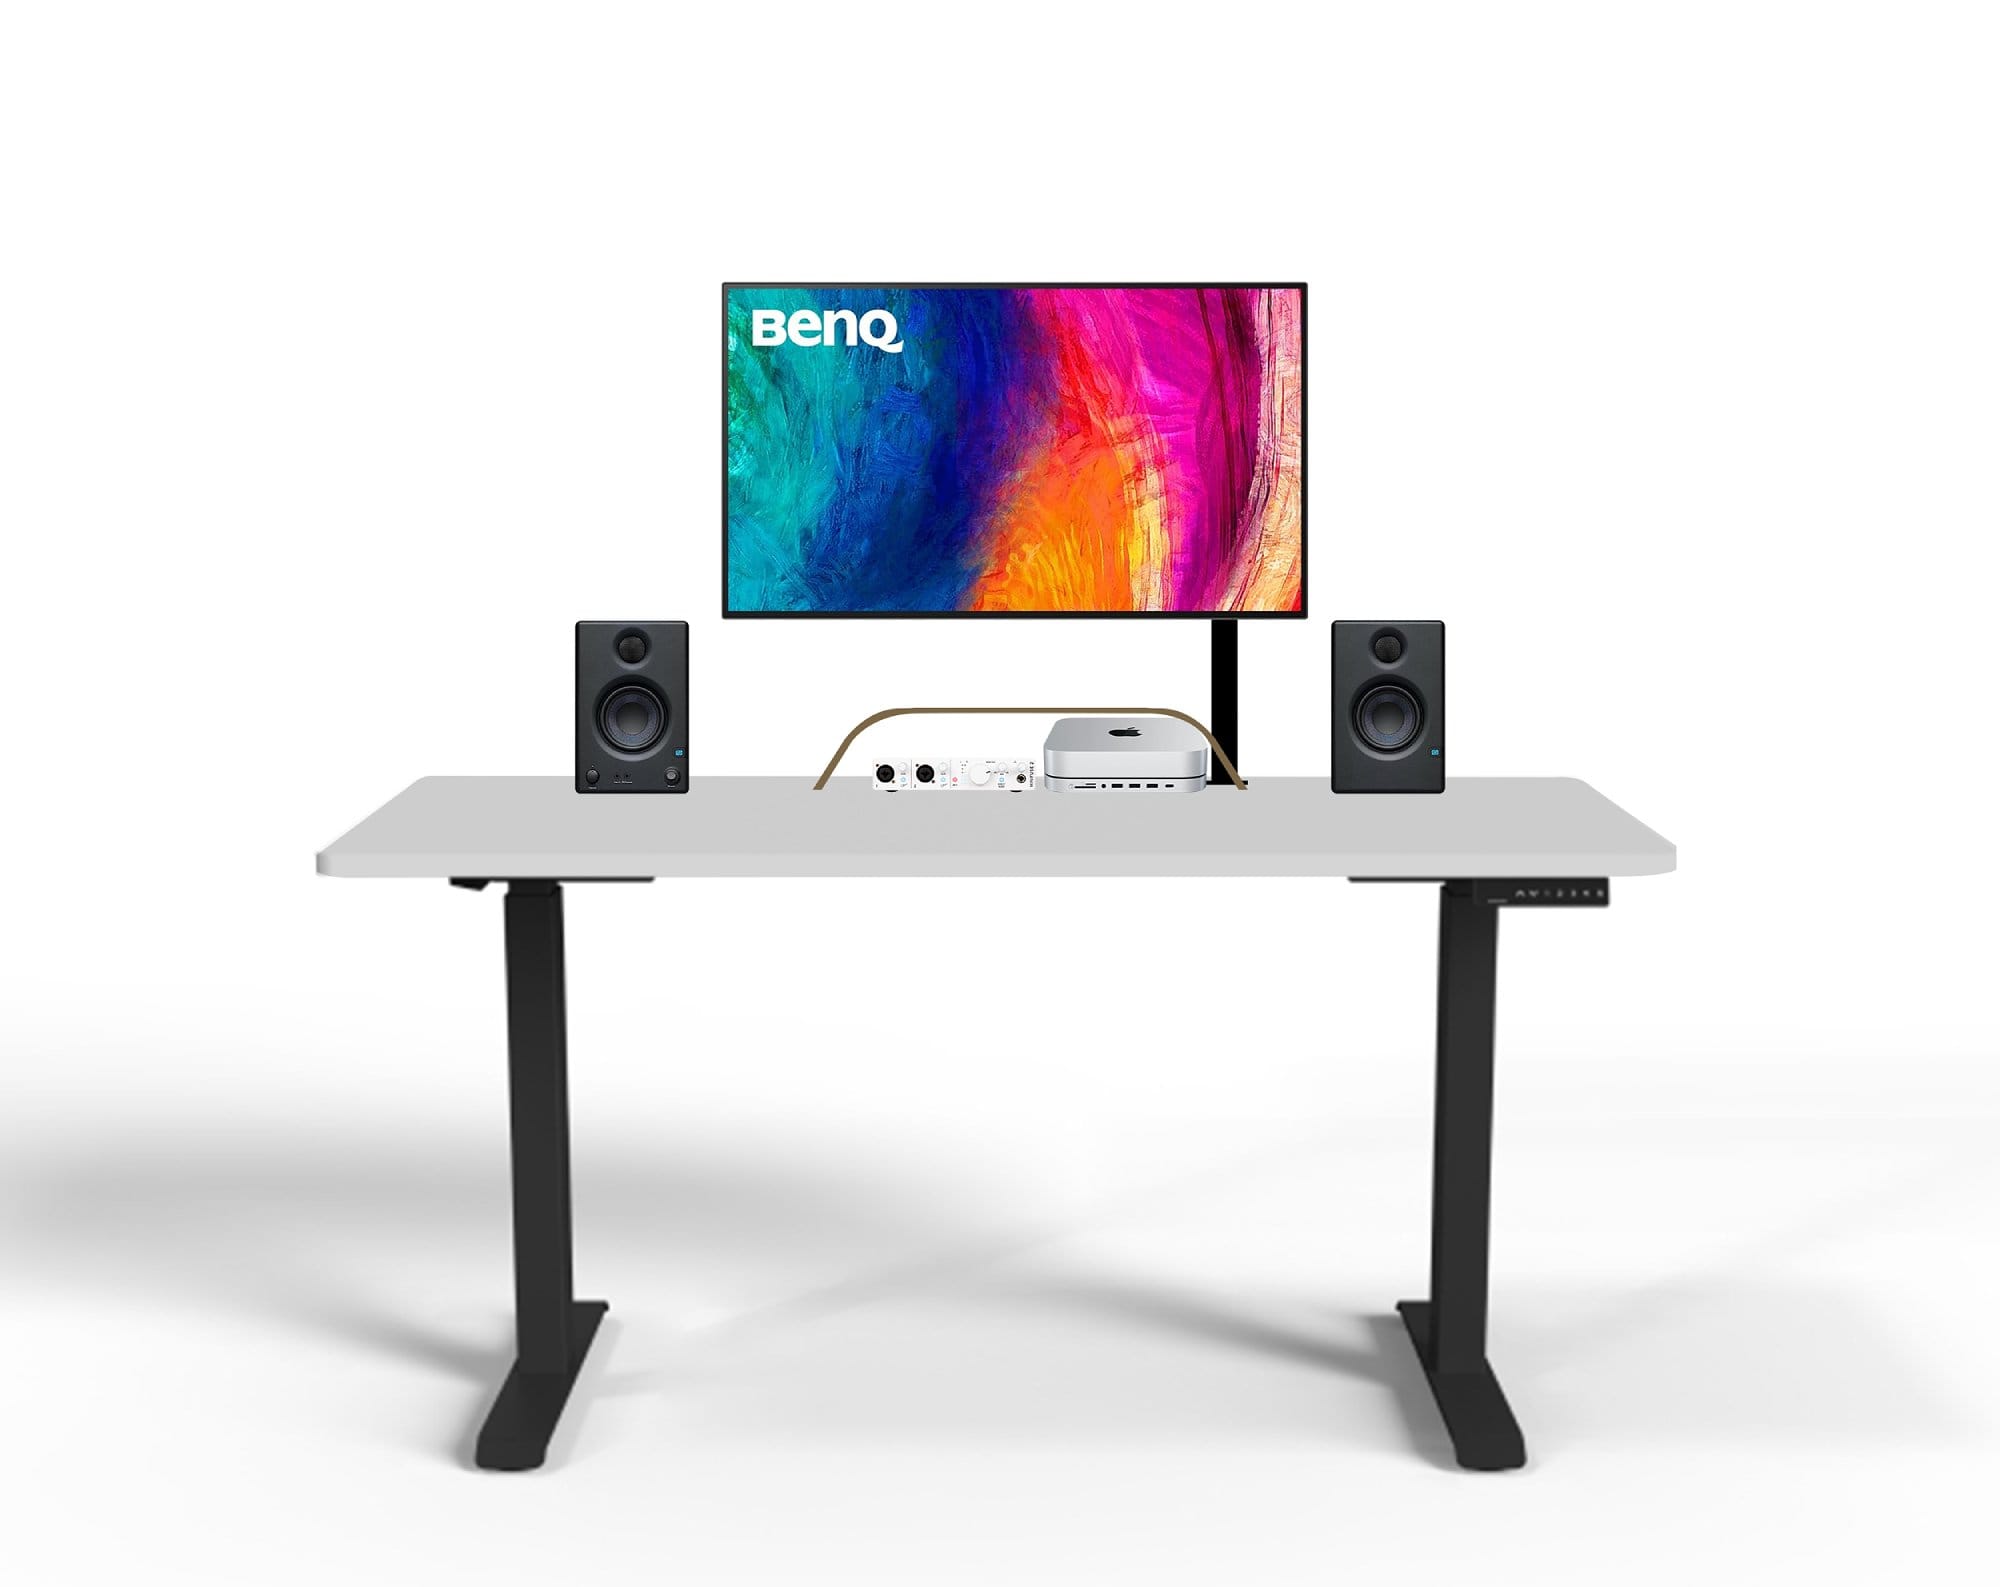 A mock-up of the minimalist desk setup with a BenQ monitor displaying a colourful abstract image, speakers on either side, and an audio interface, with a white tabletop and black legs on an isolated white background